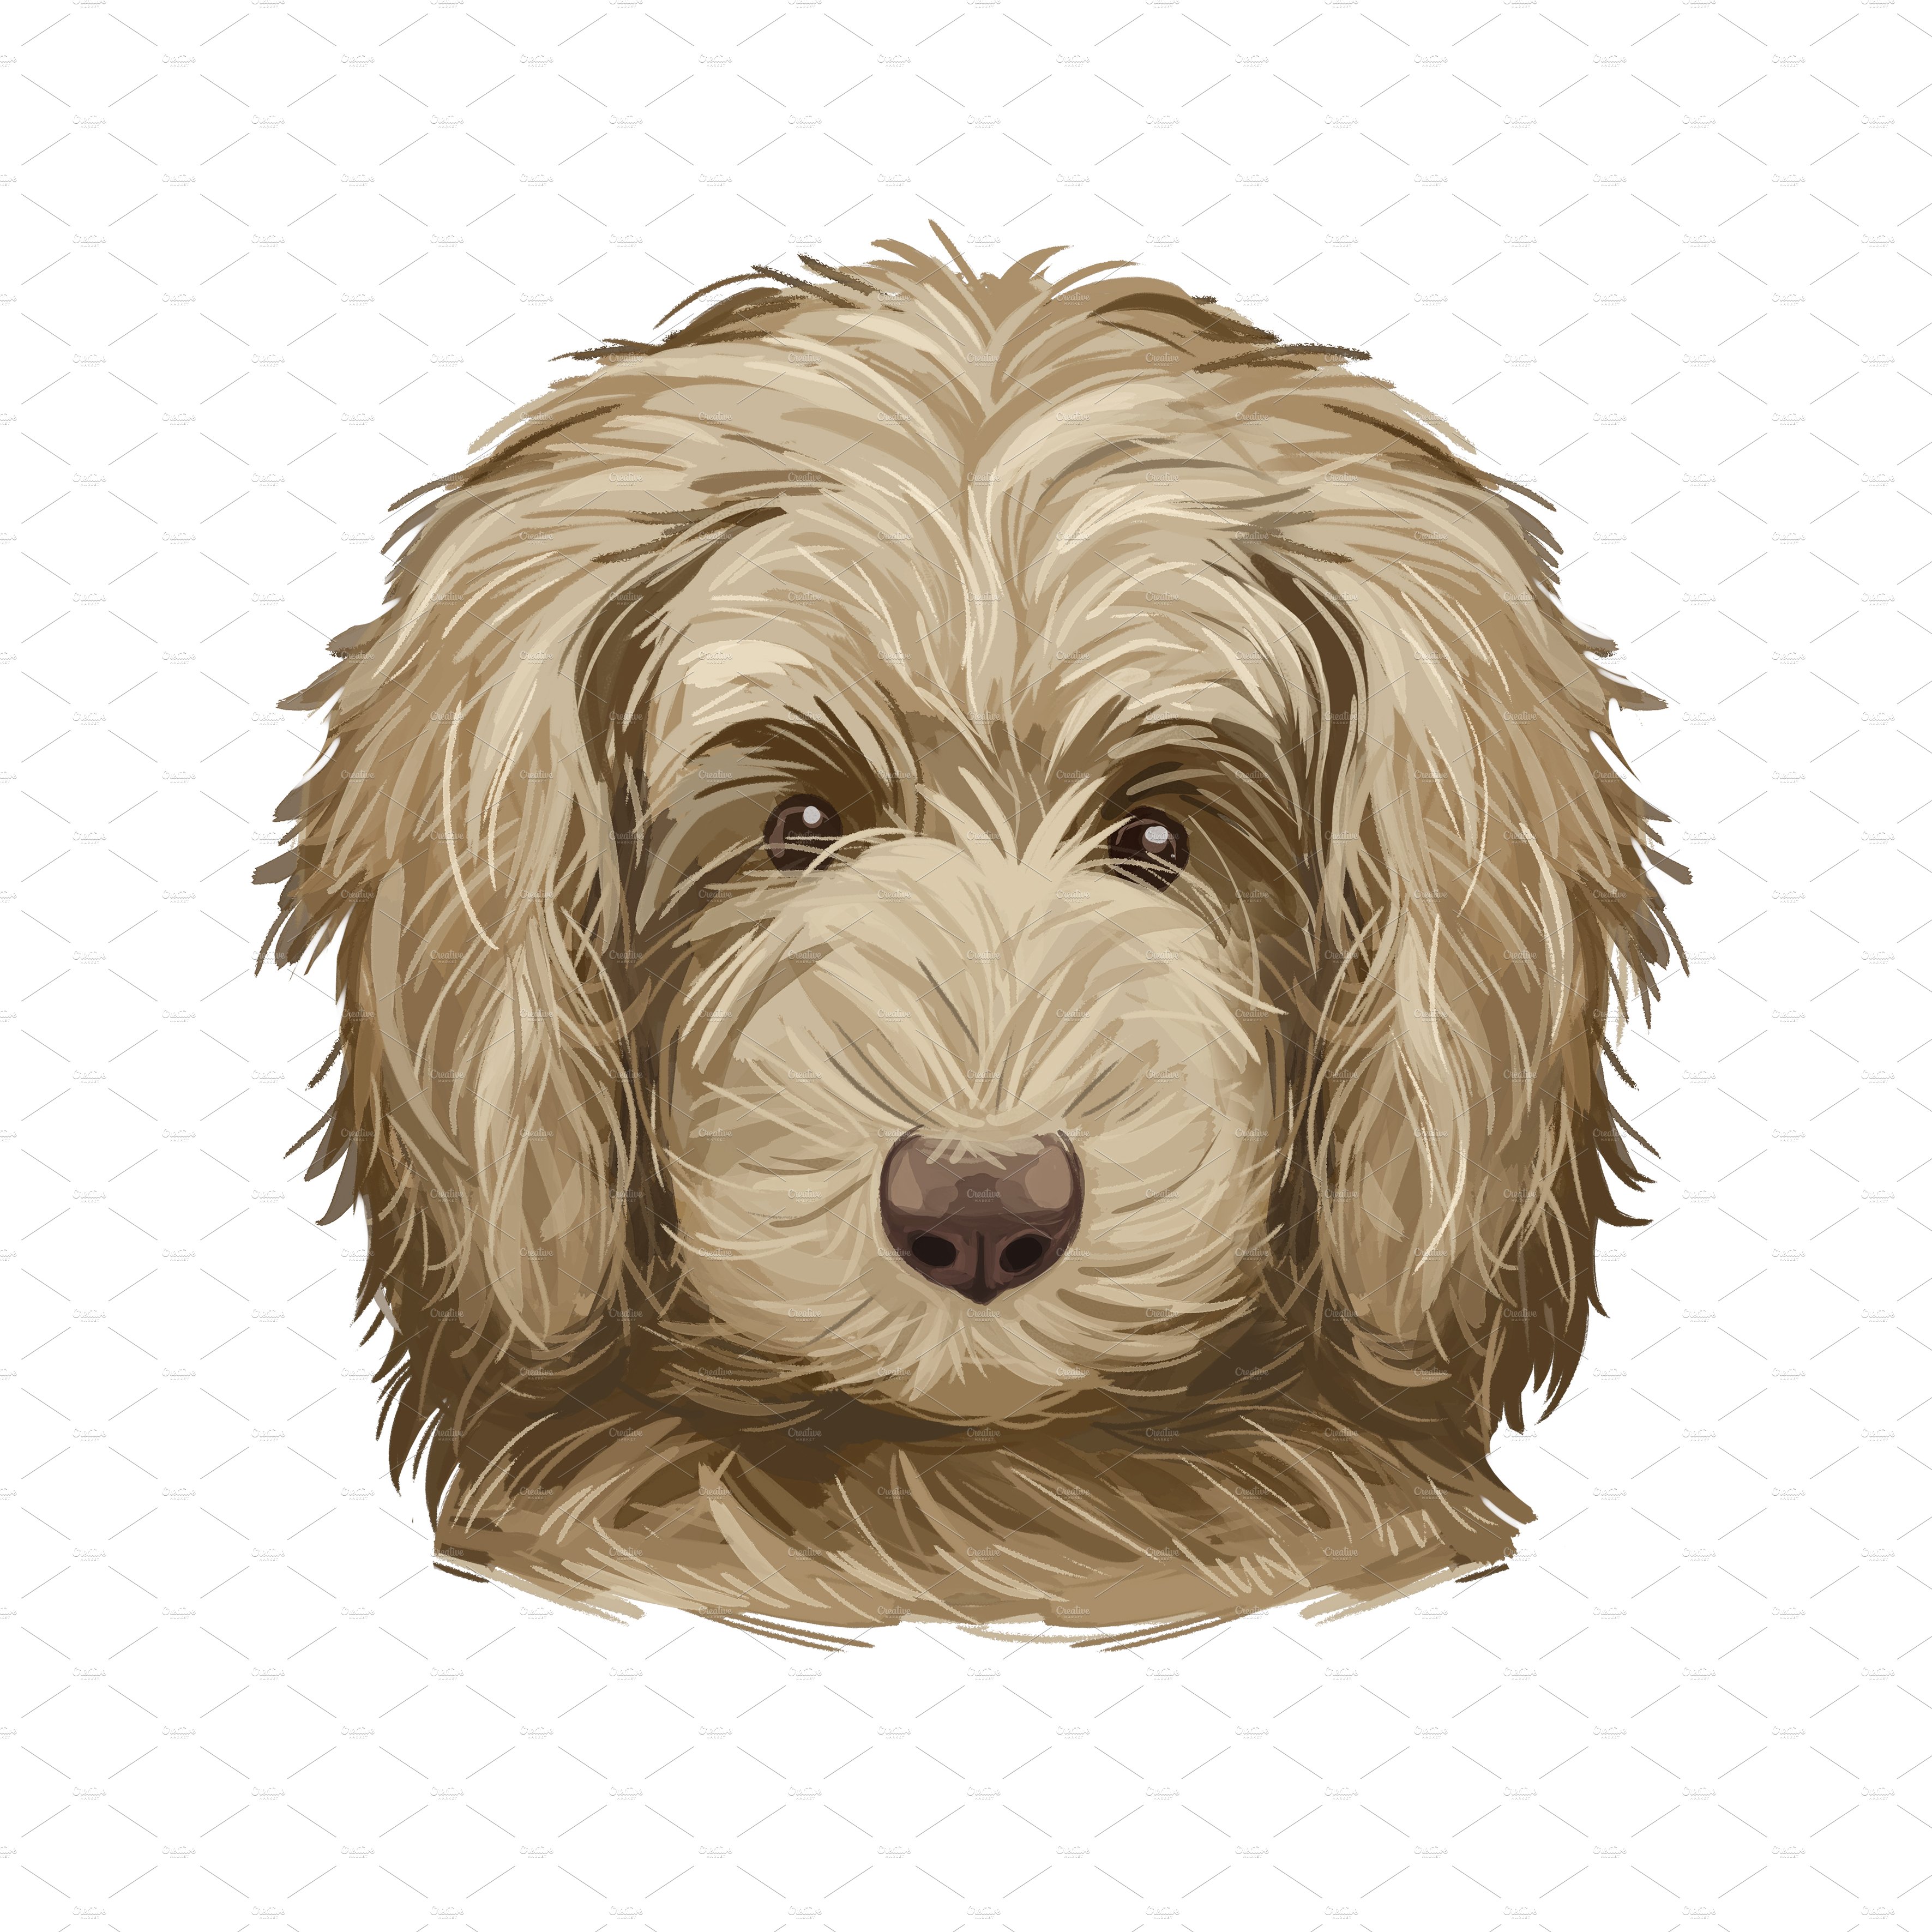 7. goldendoodle puppy 28129 762